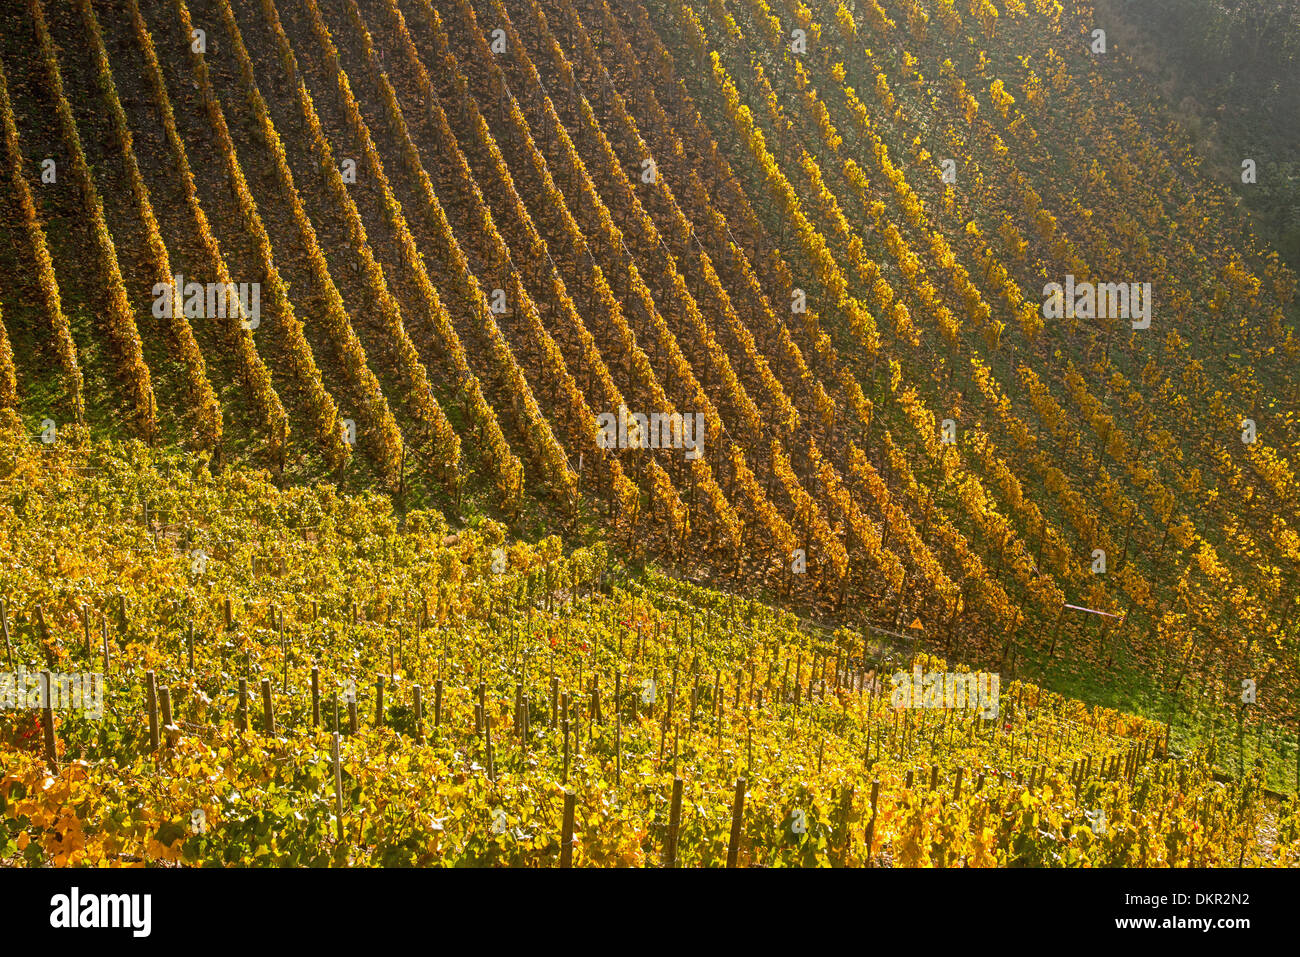 Ahrtal cultivation outhouse cultivation mountain slope leaves Germany Eifel Europe autumn autumn colors autumnal scenery Stock Photo